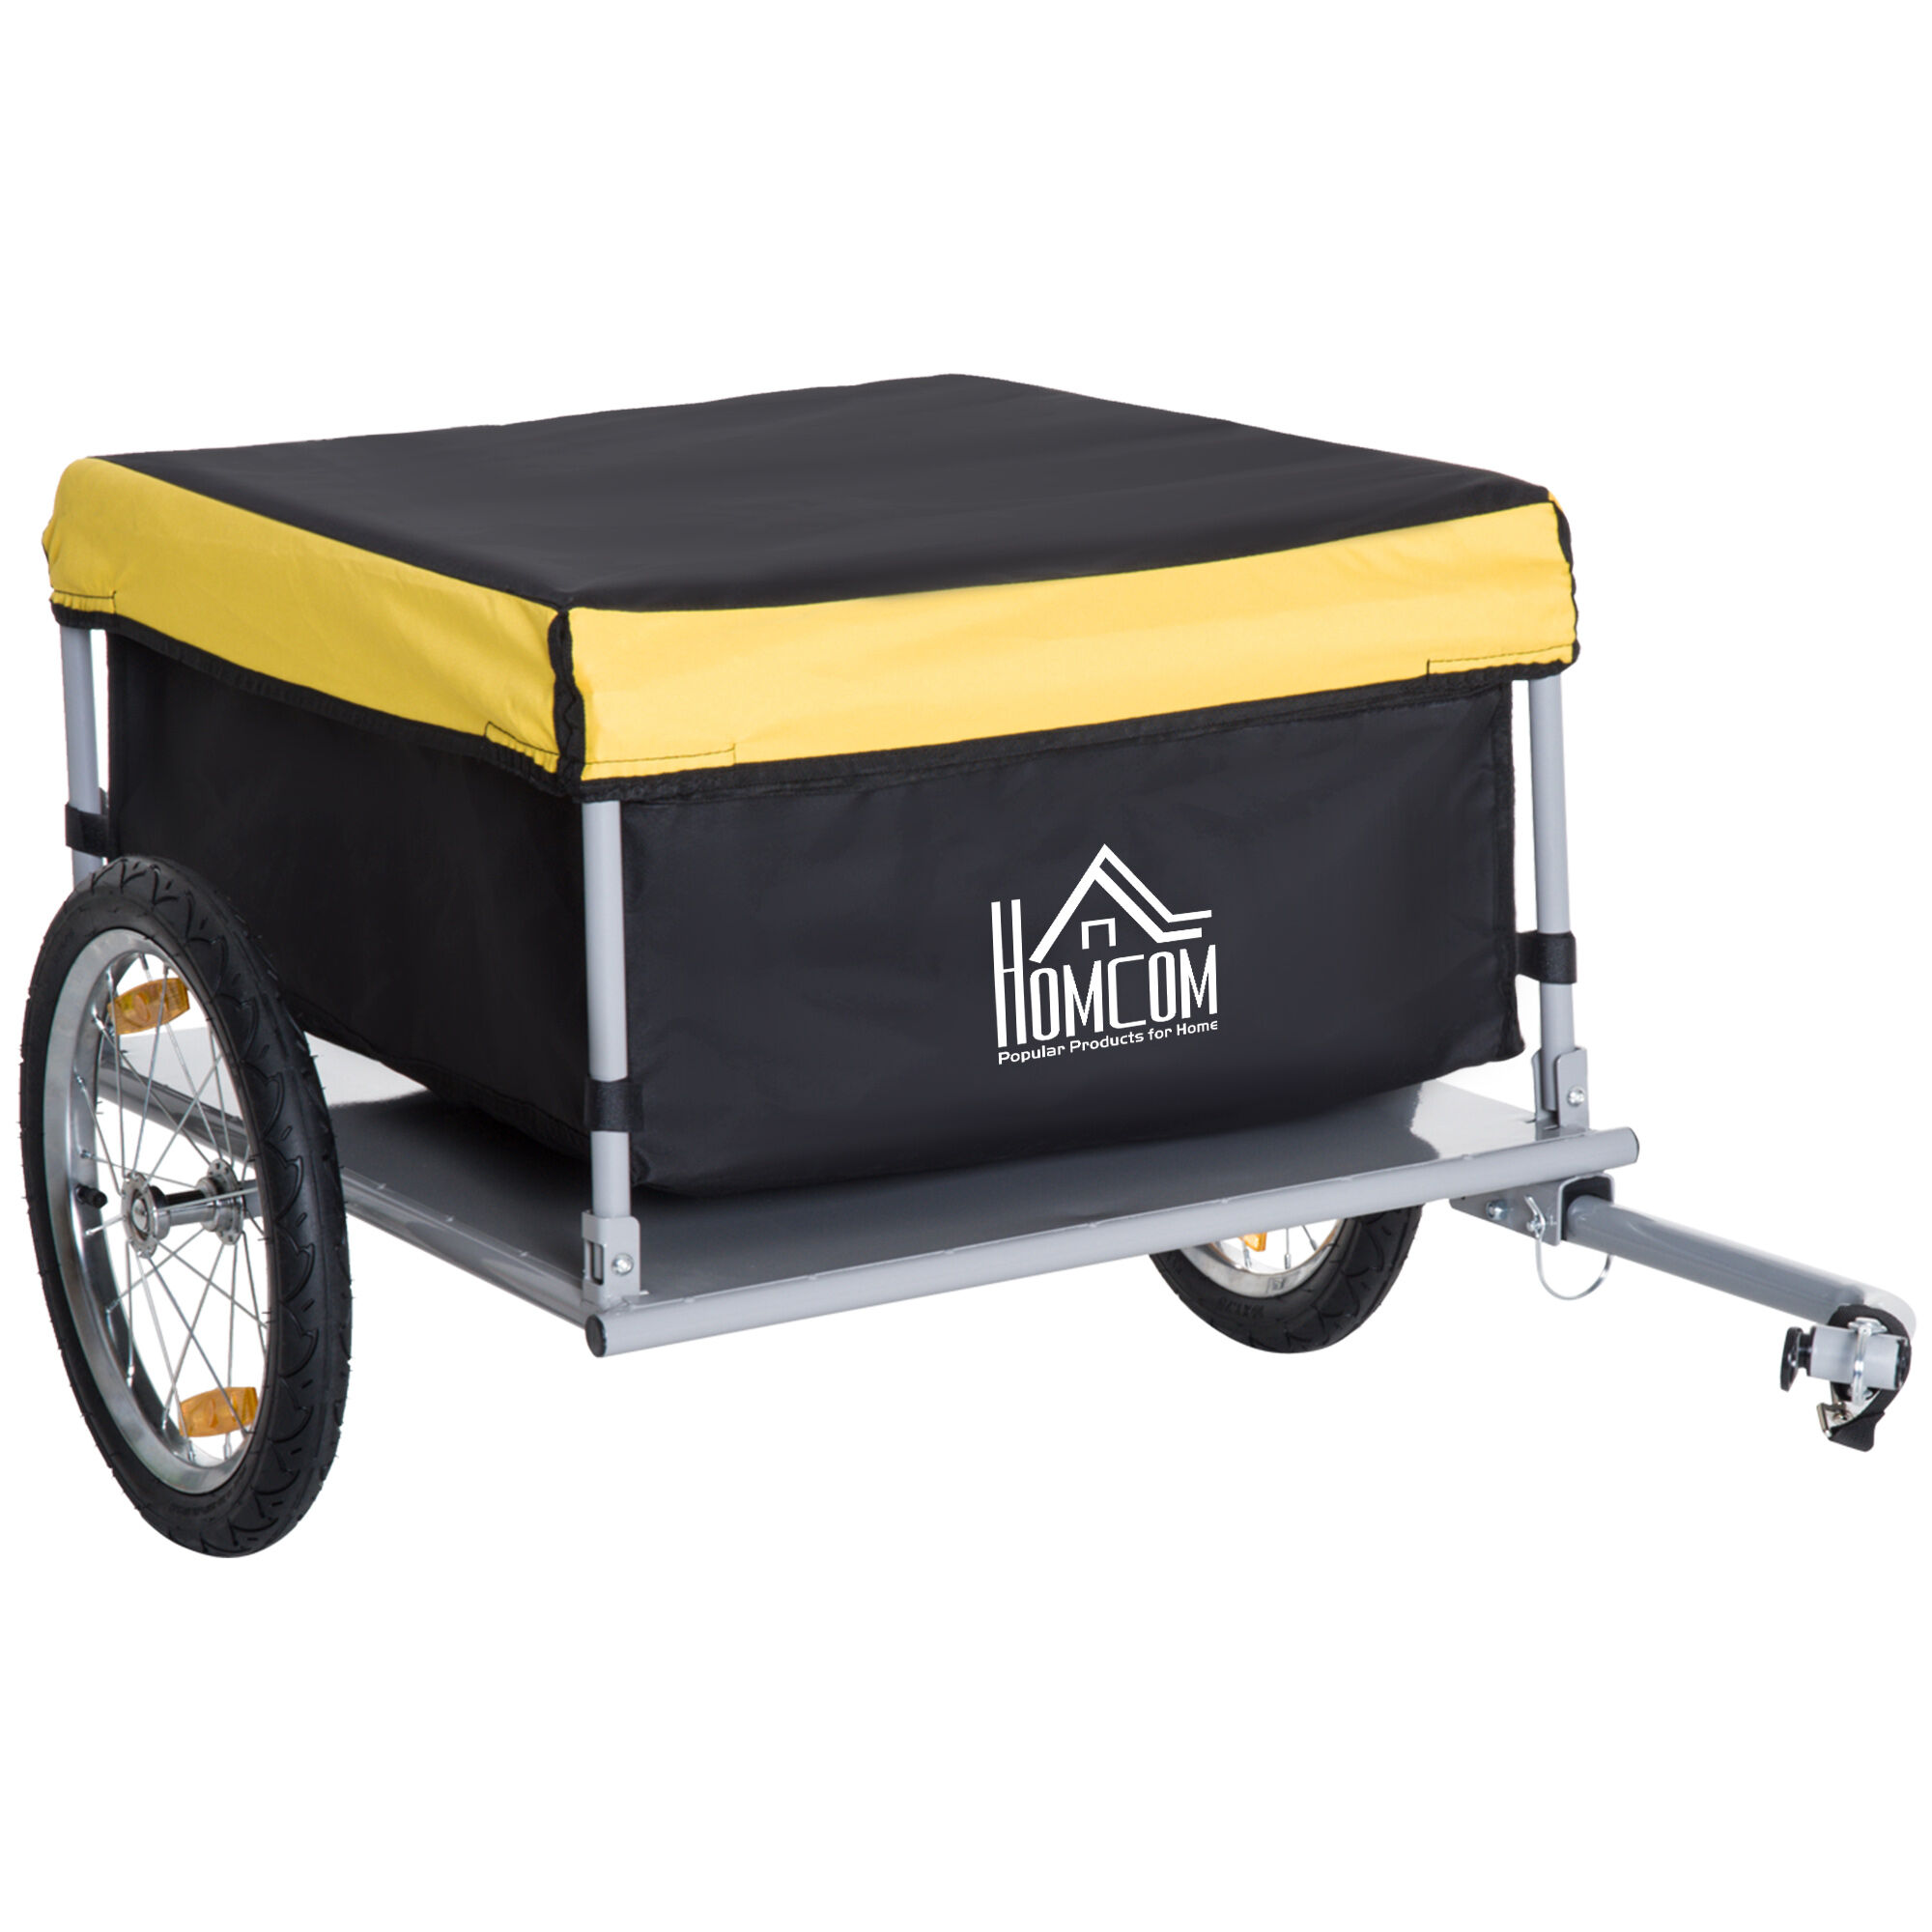 Aosom Bicycle Cargo Trailer, Two-Wheel Bike Luggage Wagon, with Removable Cover, Yellow, Durable   Aosom.com